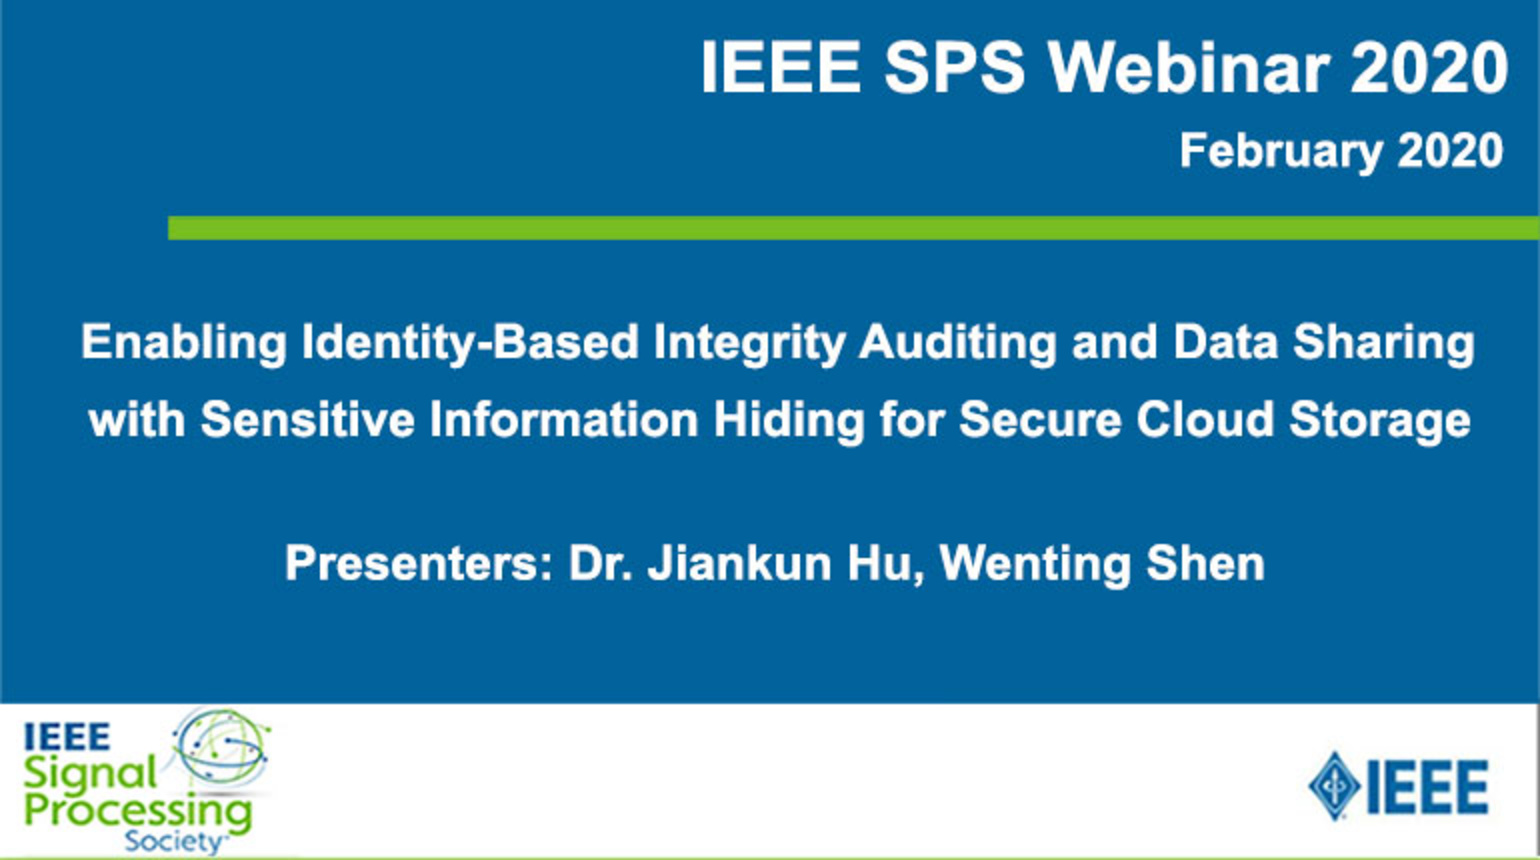 Enabling Identity-Based Integrity Auditing and Data Sharing With Sensitive Information Hiding for Secure Cloud Storage